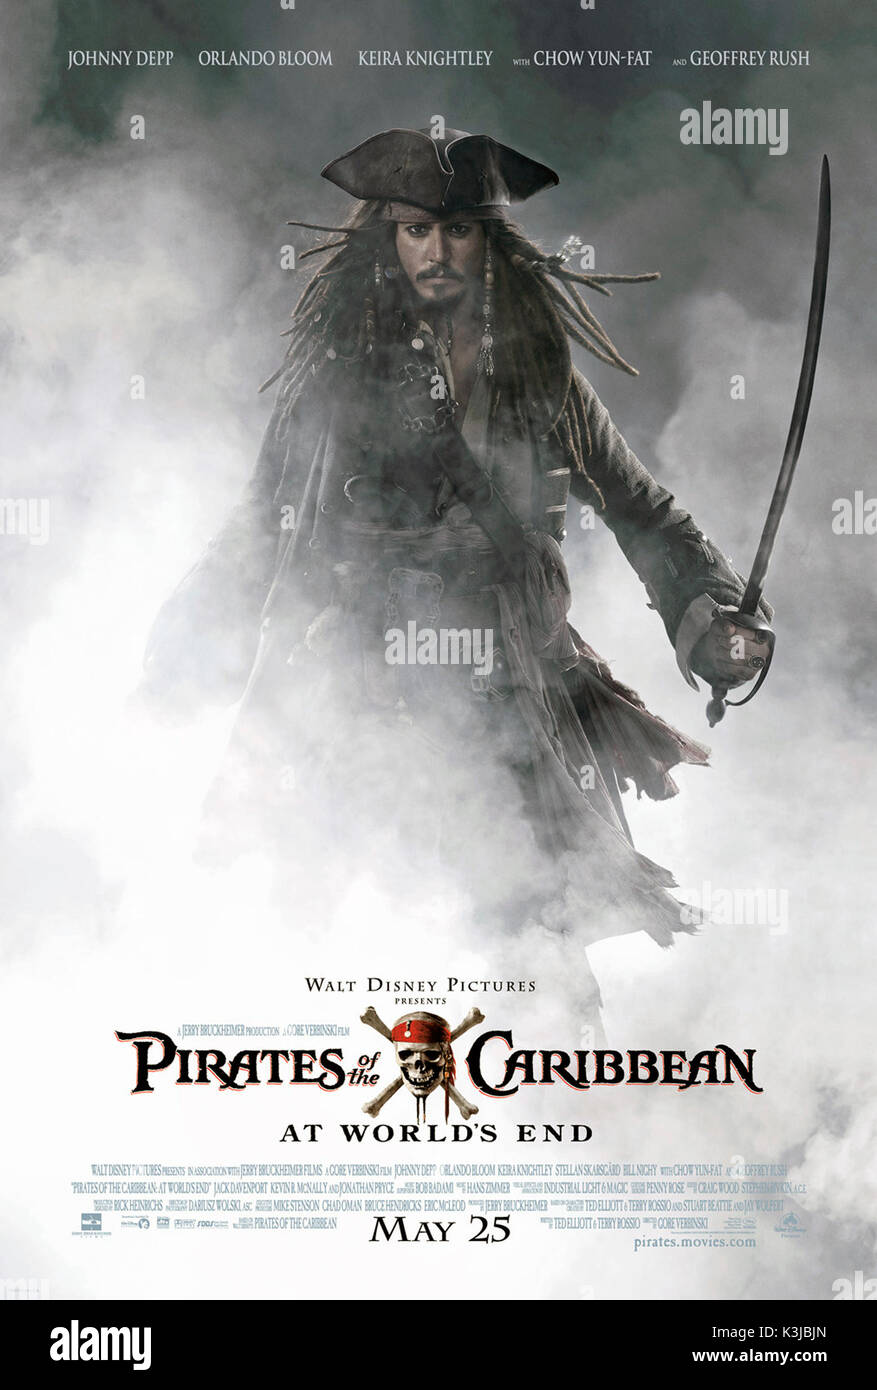 PIRATES OF THE CARIBBEAN: AT WORLD'S END [US 2007] aka PIRATES OF THE CARIBBEAN 3 JOHNNY DEPP as Captain Jack Sparrow  PIRATES OF THE CARIBBEAN: AT WORLD'S END [US 2007]  aka PIRATES OF THE CARIBBEAN 3  JOHNNY DEPP as Captain Jack Sparrow     Date: 2007 Stock Photo